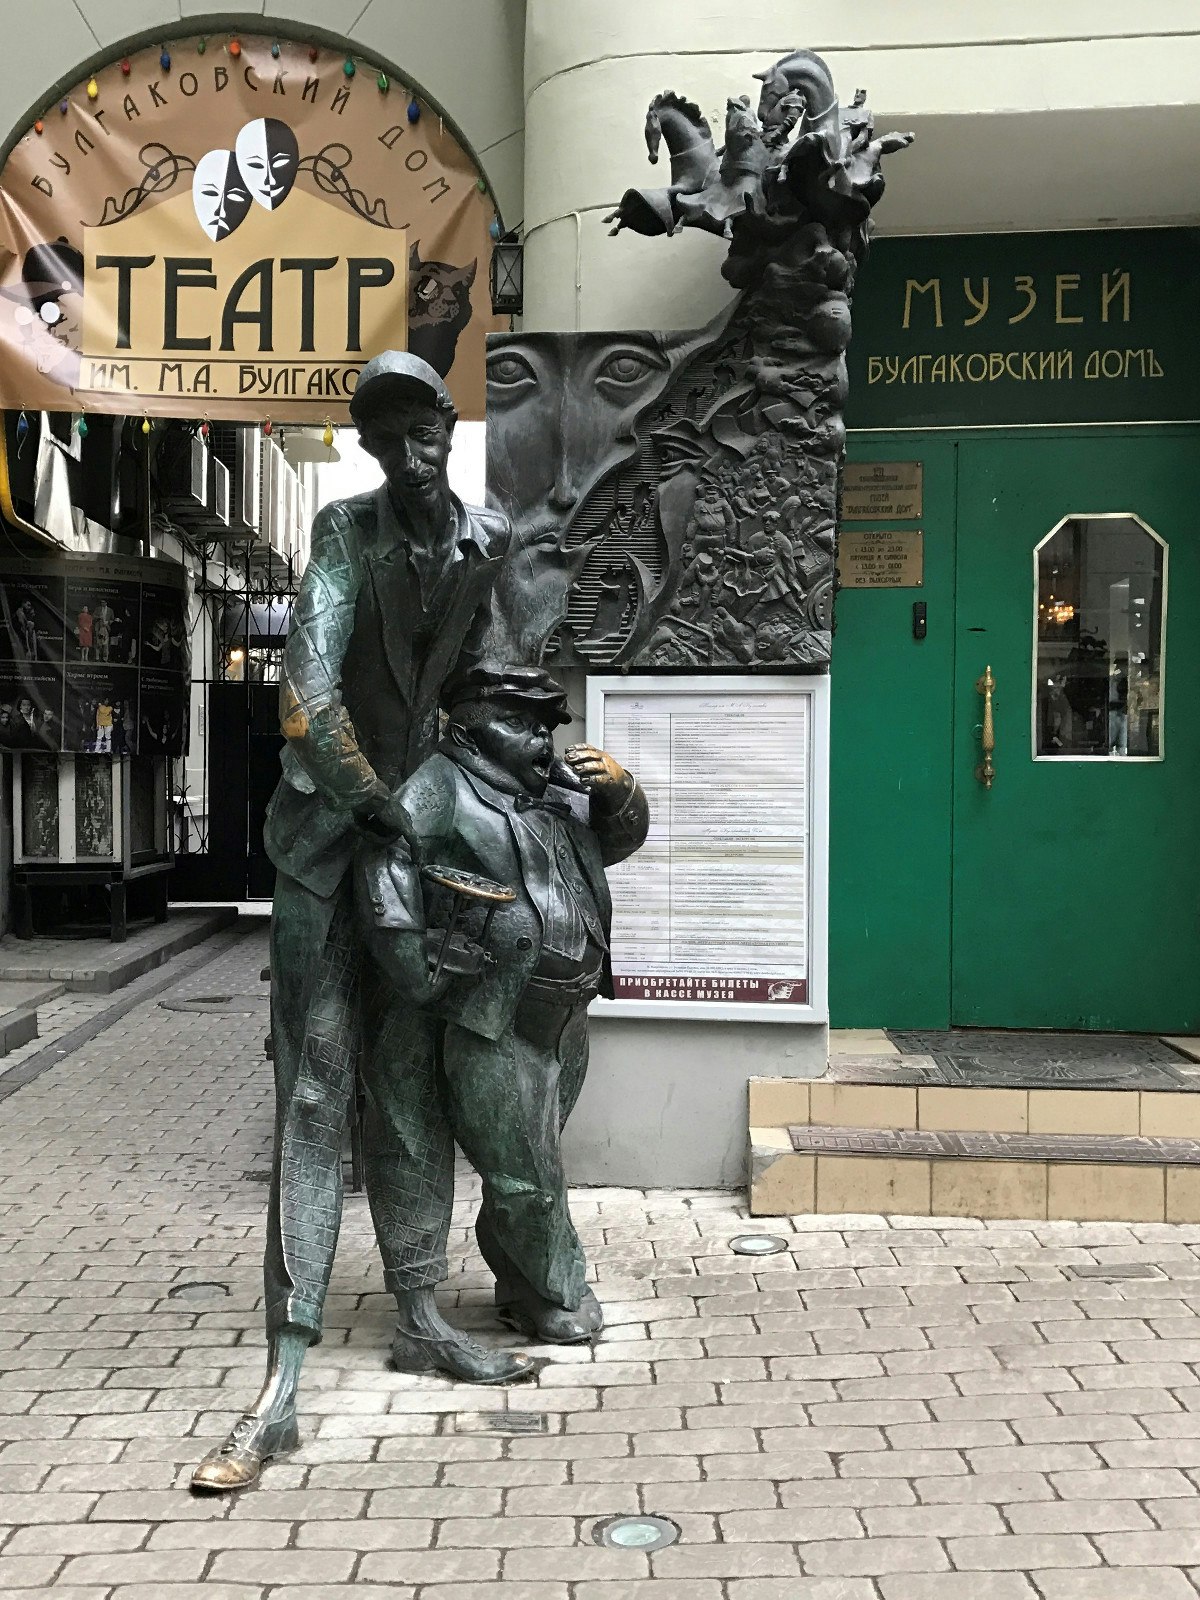 The characters from The Master and Margarita at the entrance to the Mikhail Bulgakov Museum in Moscow © Kira Tverskaya / Lonely Planet